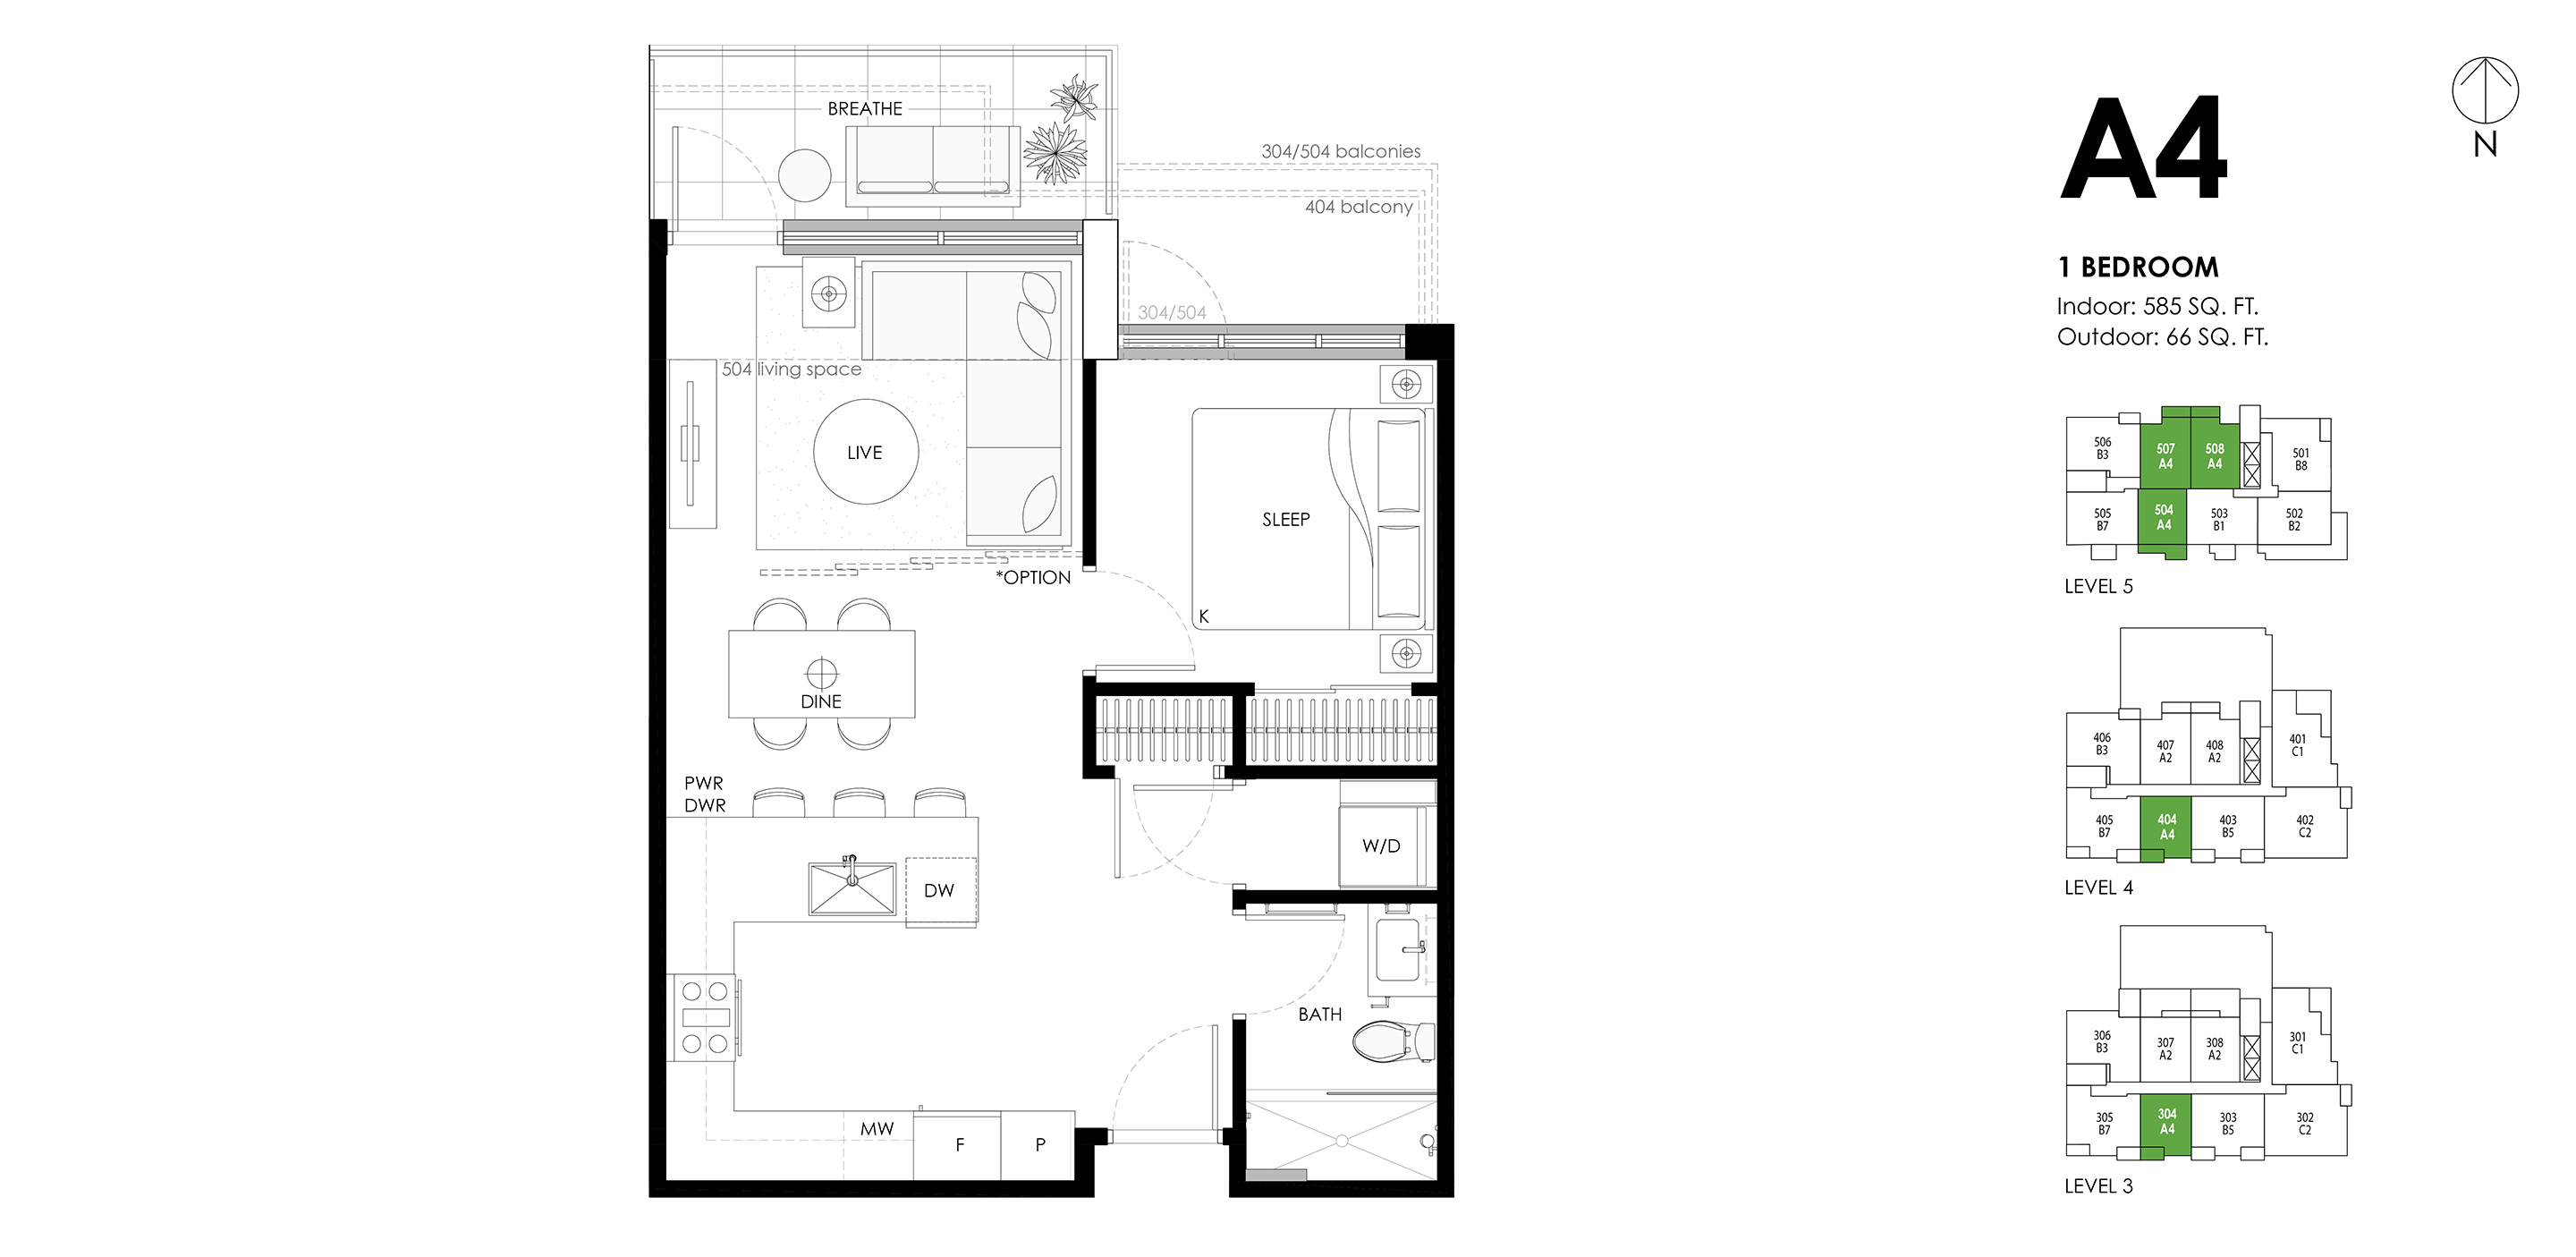 A4 Floor Plan of Ava Condos with undefined beds